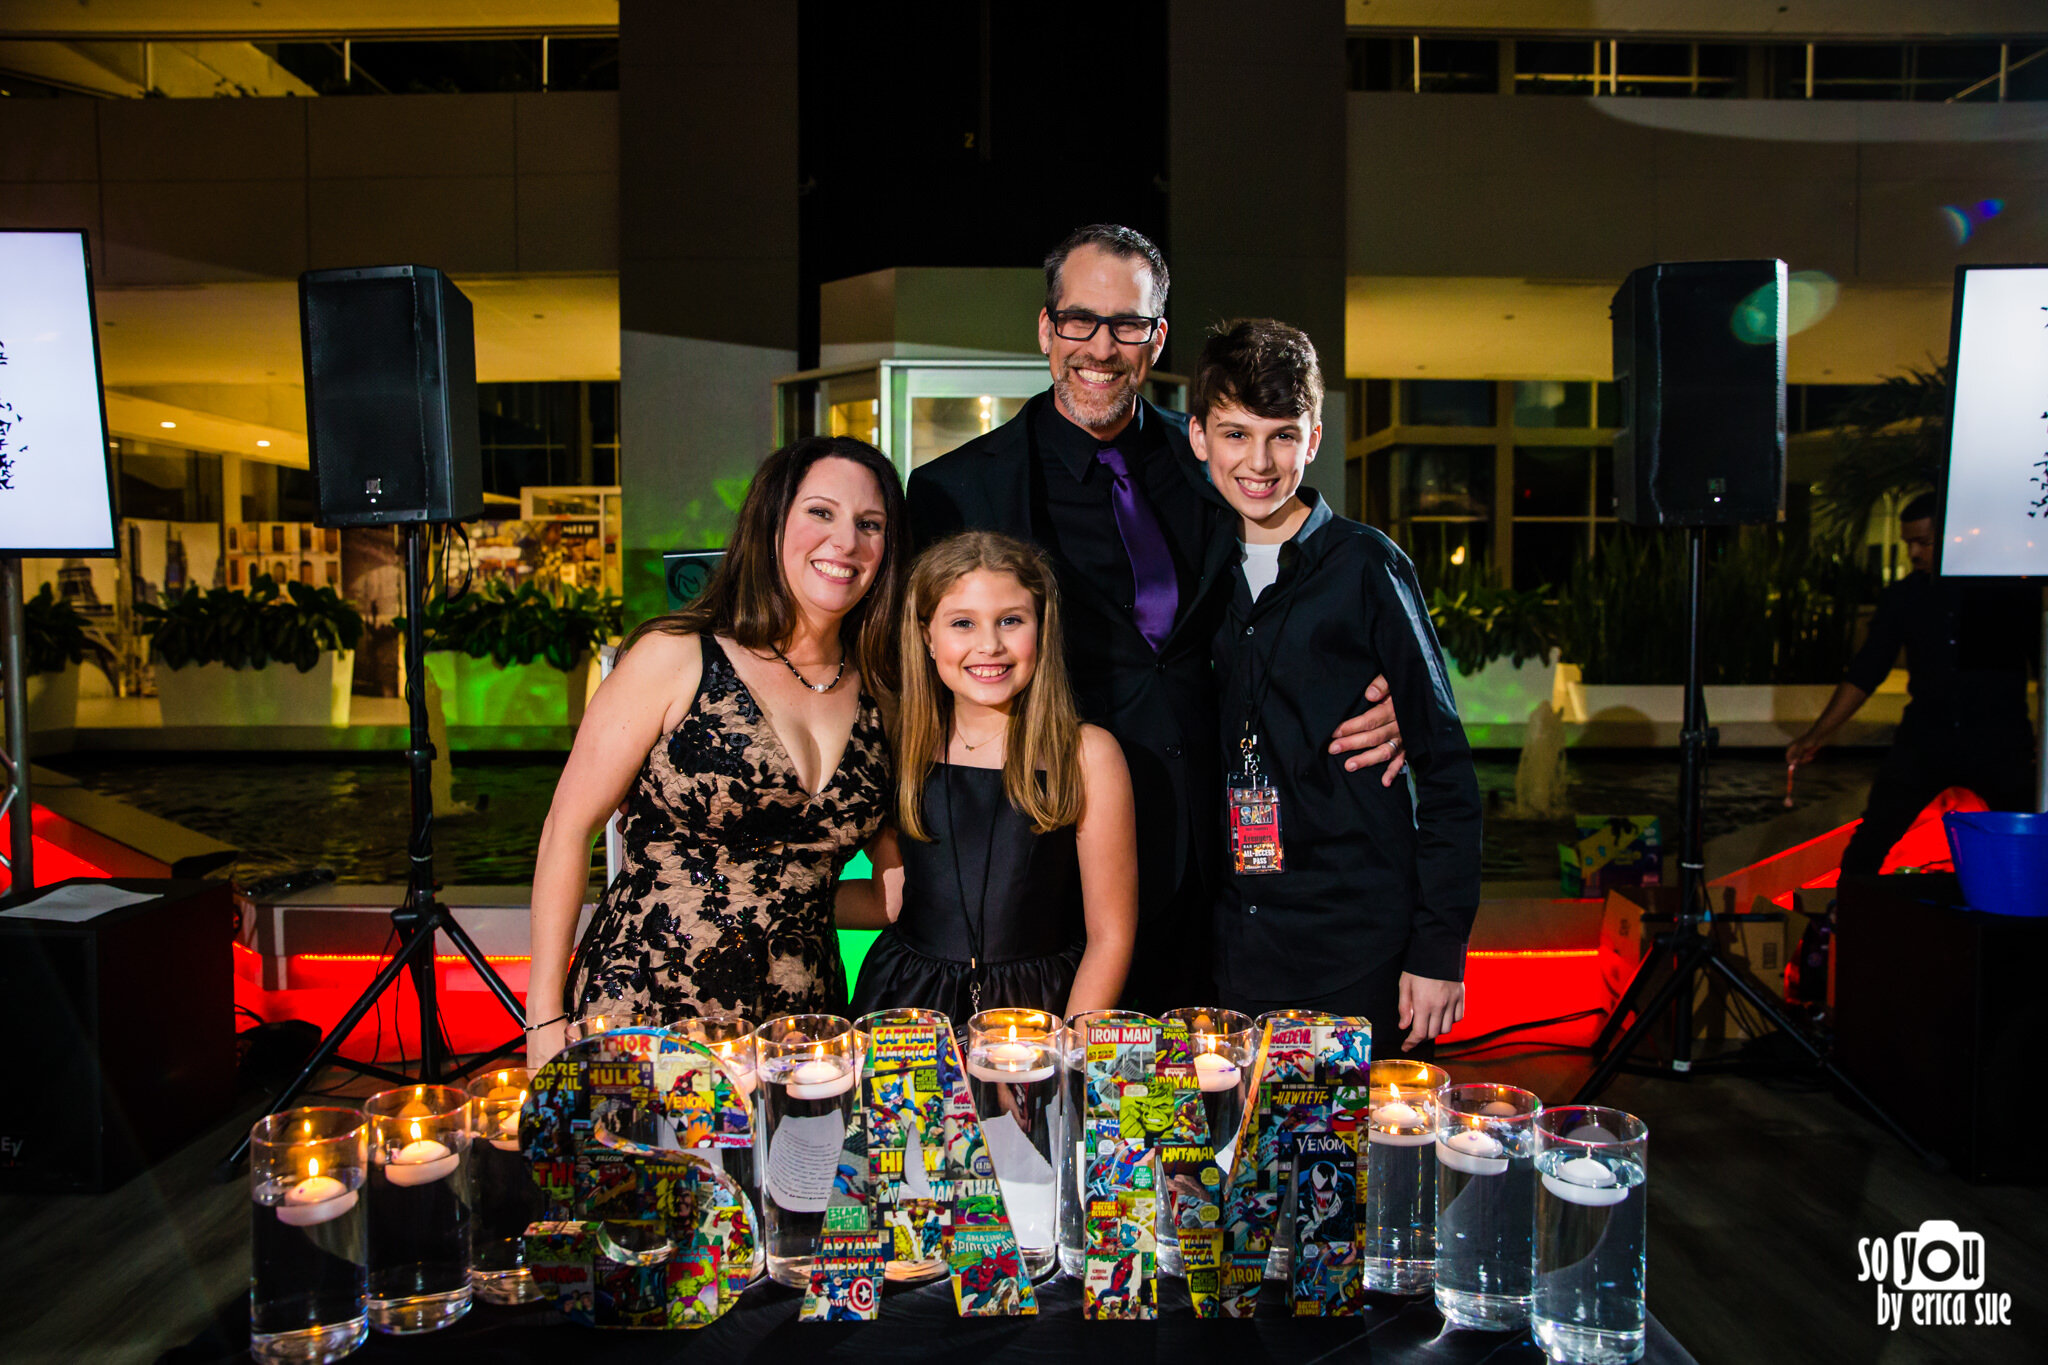 53-so-you-by-erica-sue-bar-mitzvah-photographer-boca-pavilion-grille-3890.JPG